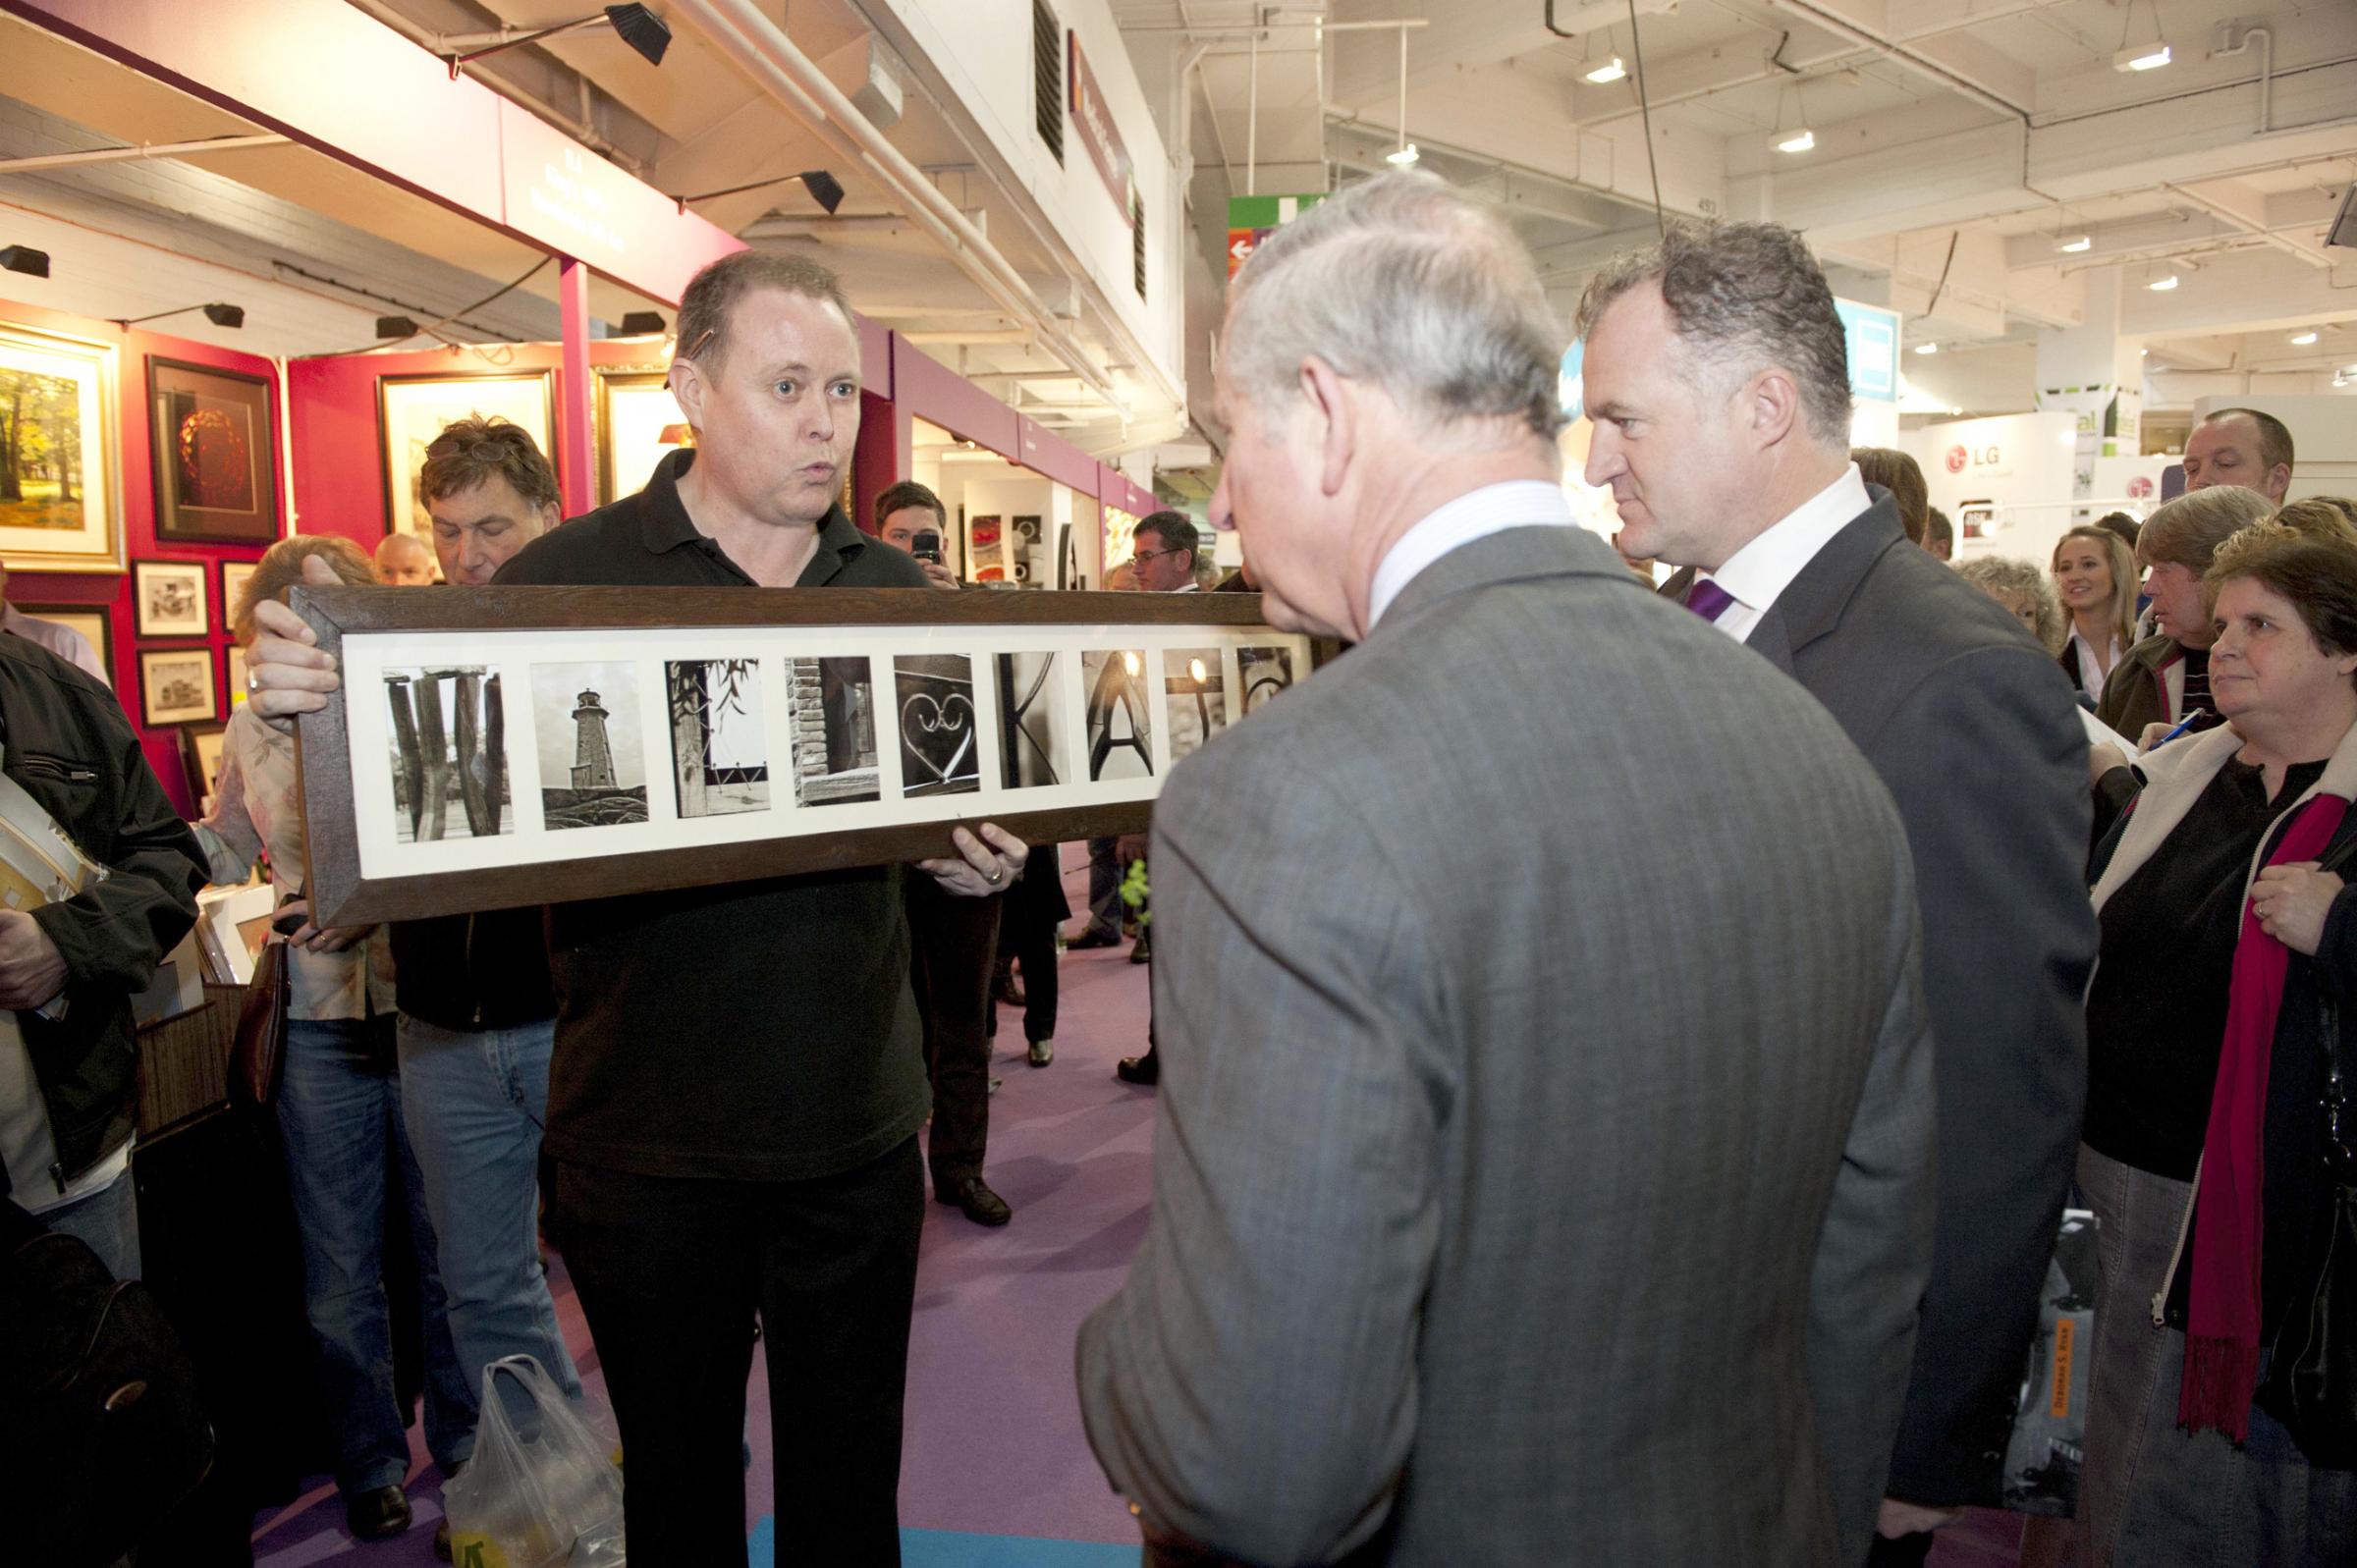 Present - Michael Wise presents Prince Charles with a wedding gift for Prince William and Kate